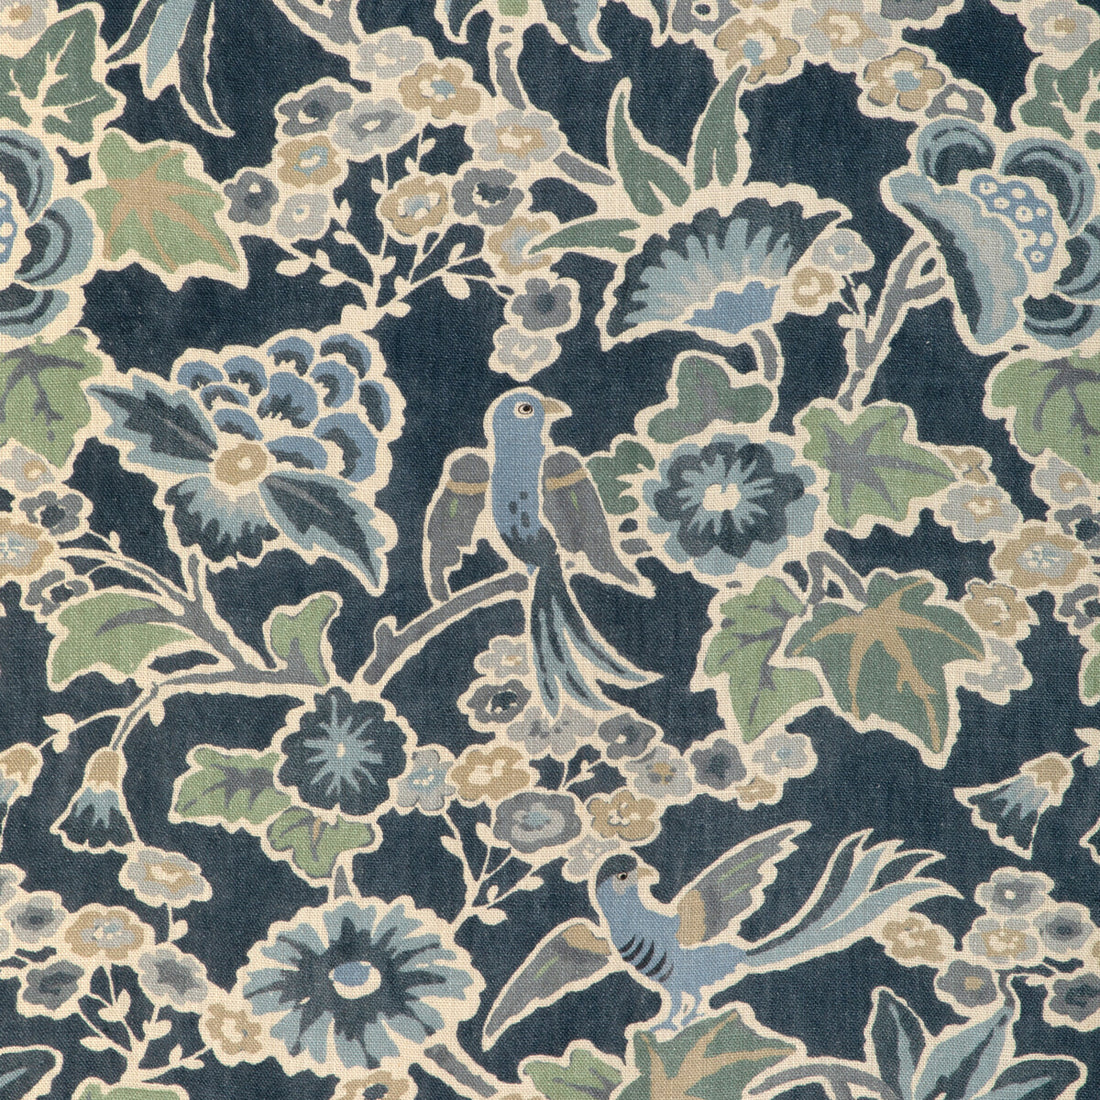 Posy Print fabric in denim/slate color - pattern 2023142.523.0 - by Lee Jofa in the Garden Walk collection